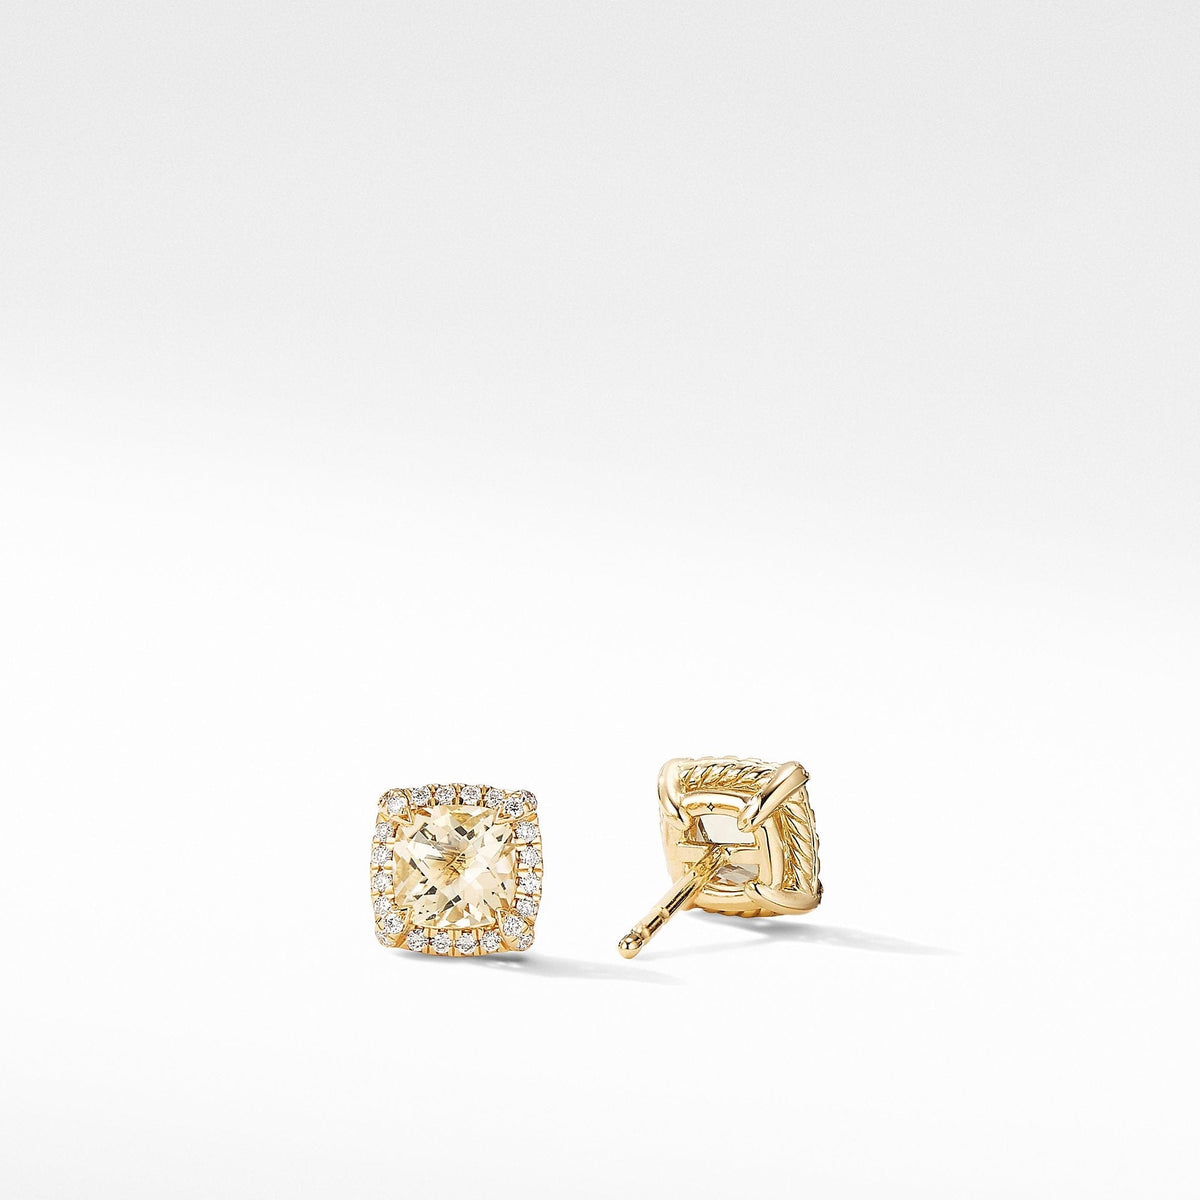 Petite Chatelaine® Pavé Bezel Stud Earrings in 18K Yellow Gold with Champagne Citrine